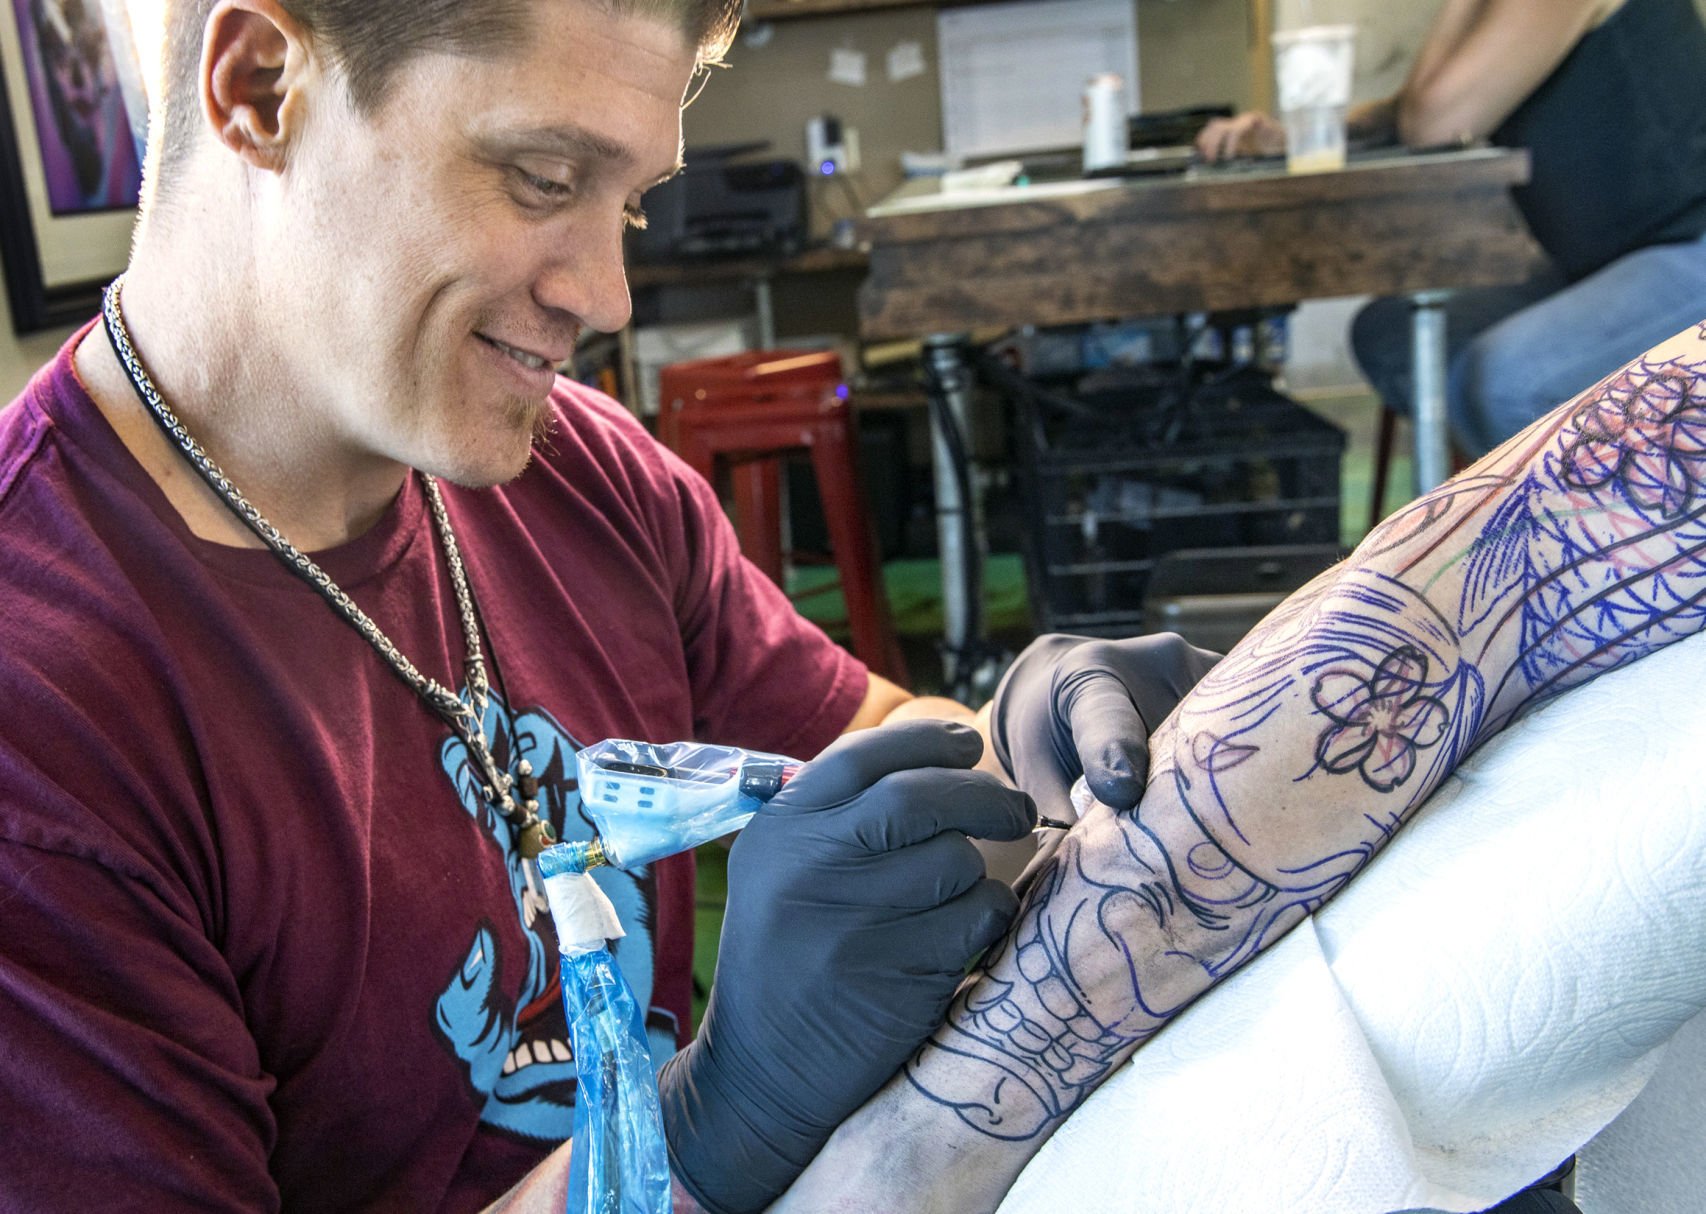 Friday the 13th Where to get 13 discounted tattoos in Tucson on July 13